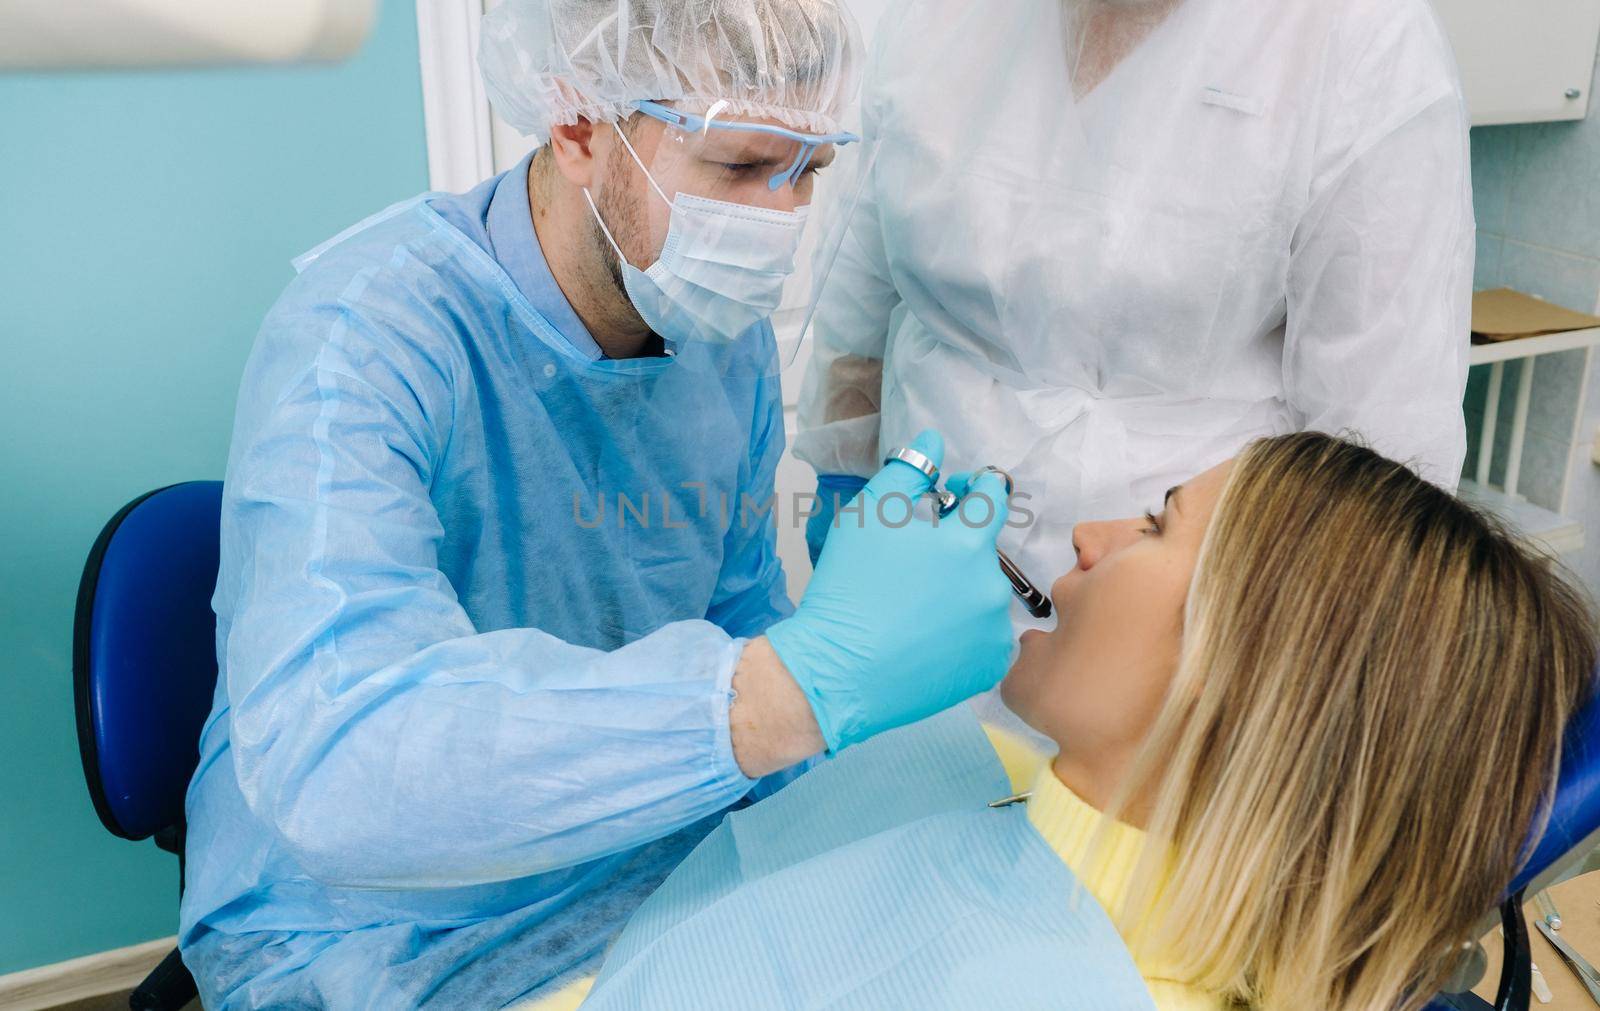 a dentist wearing a protective mask sits nearby and holds instruments in his hands before treating a patient in the dental office.